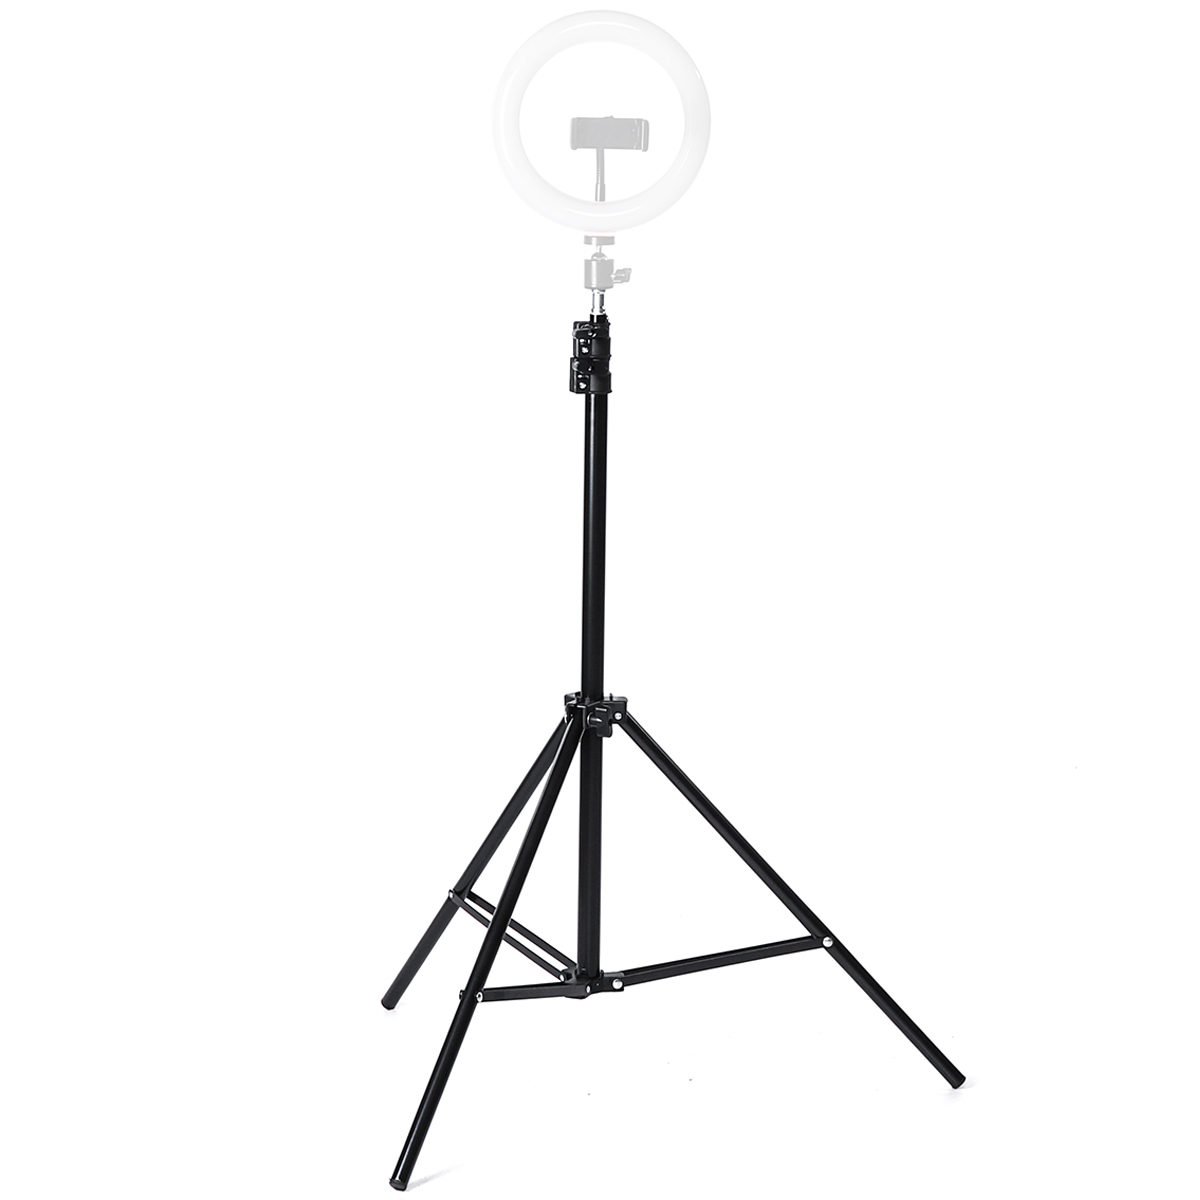 LED-Ring-Light-Tripod-Stand-Studio-Photo-Video-Tripod-Lighting-Stand-for-Youtube-Mobile-Phone-Live-S-1697976-1